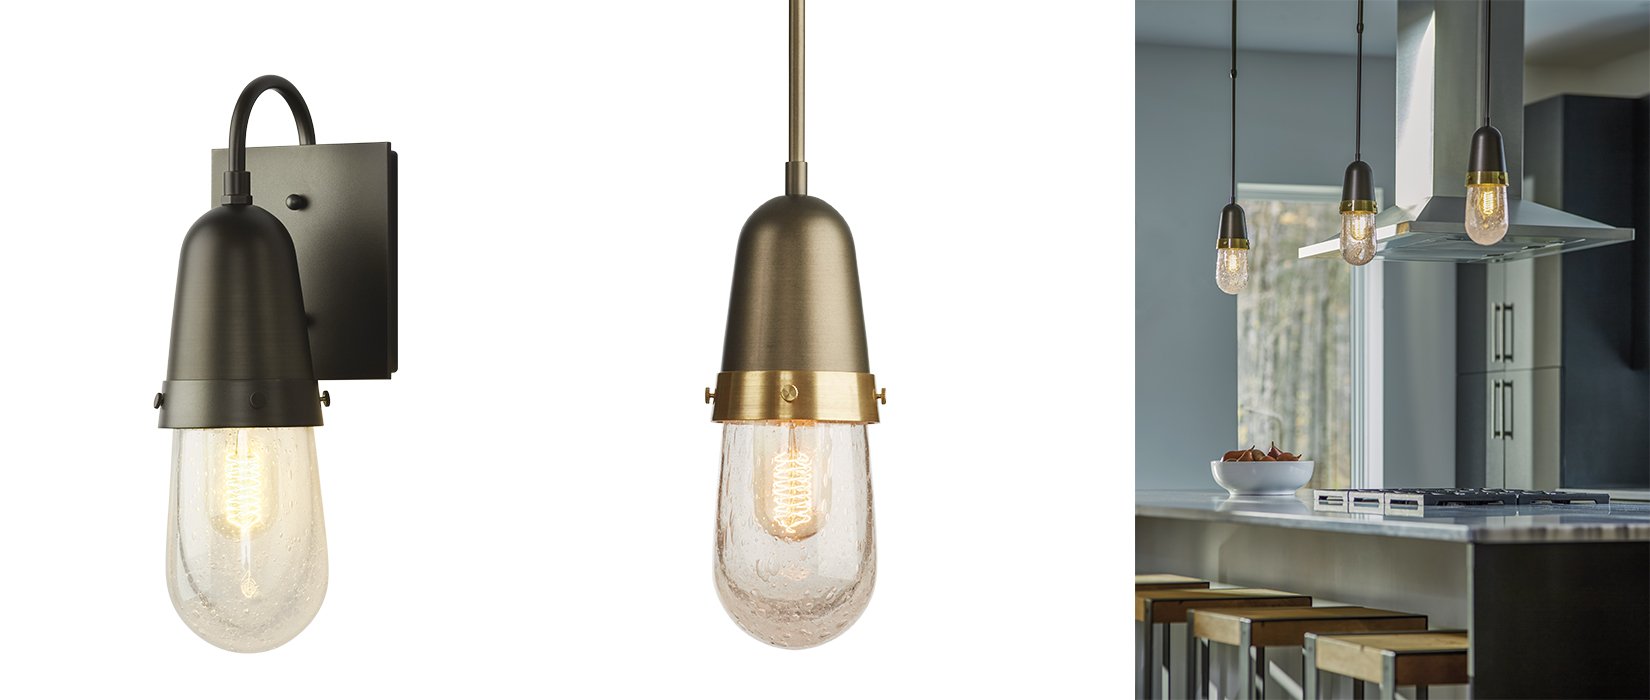 Fizz Sconce and kitchen pendant